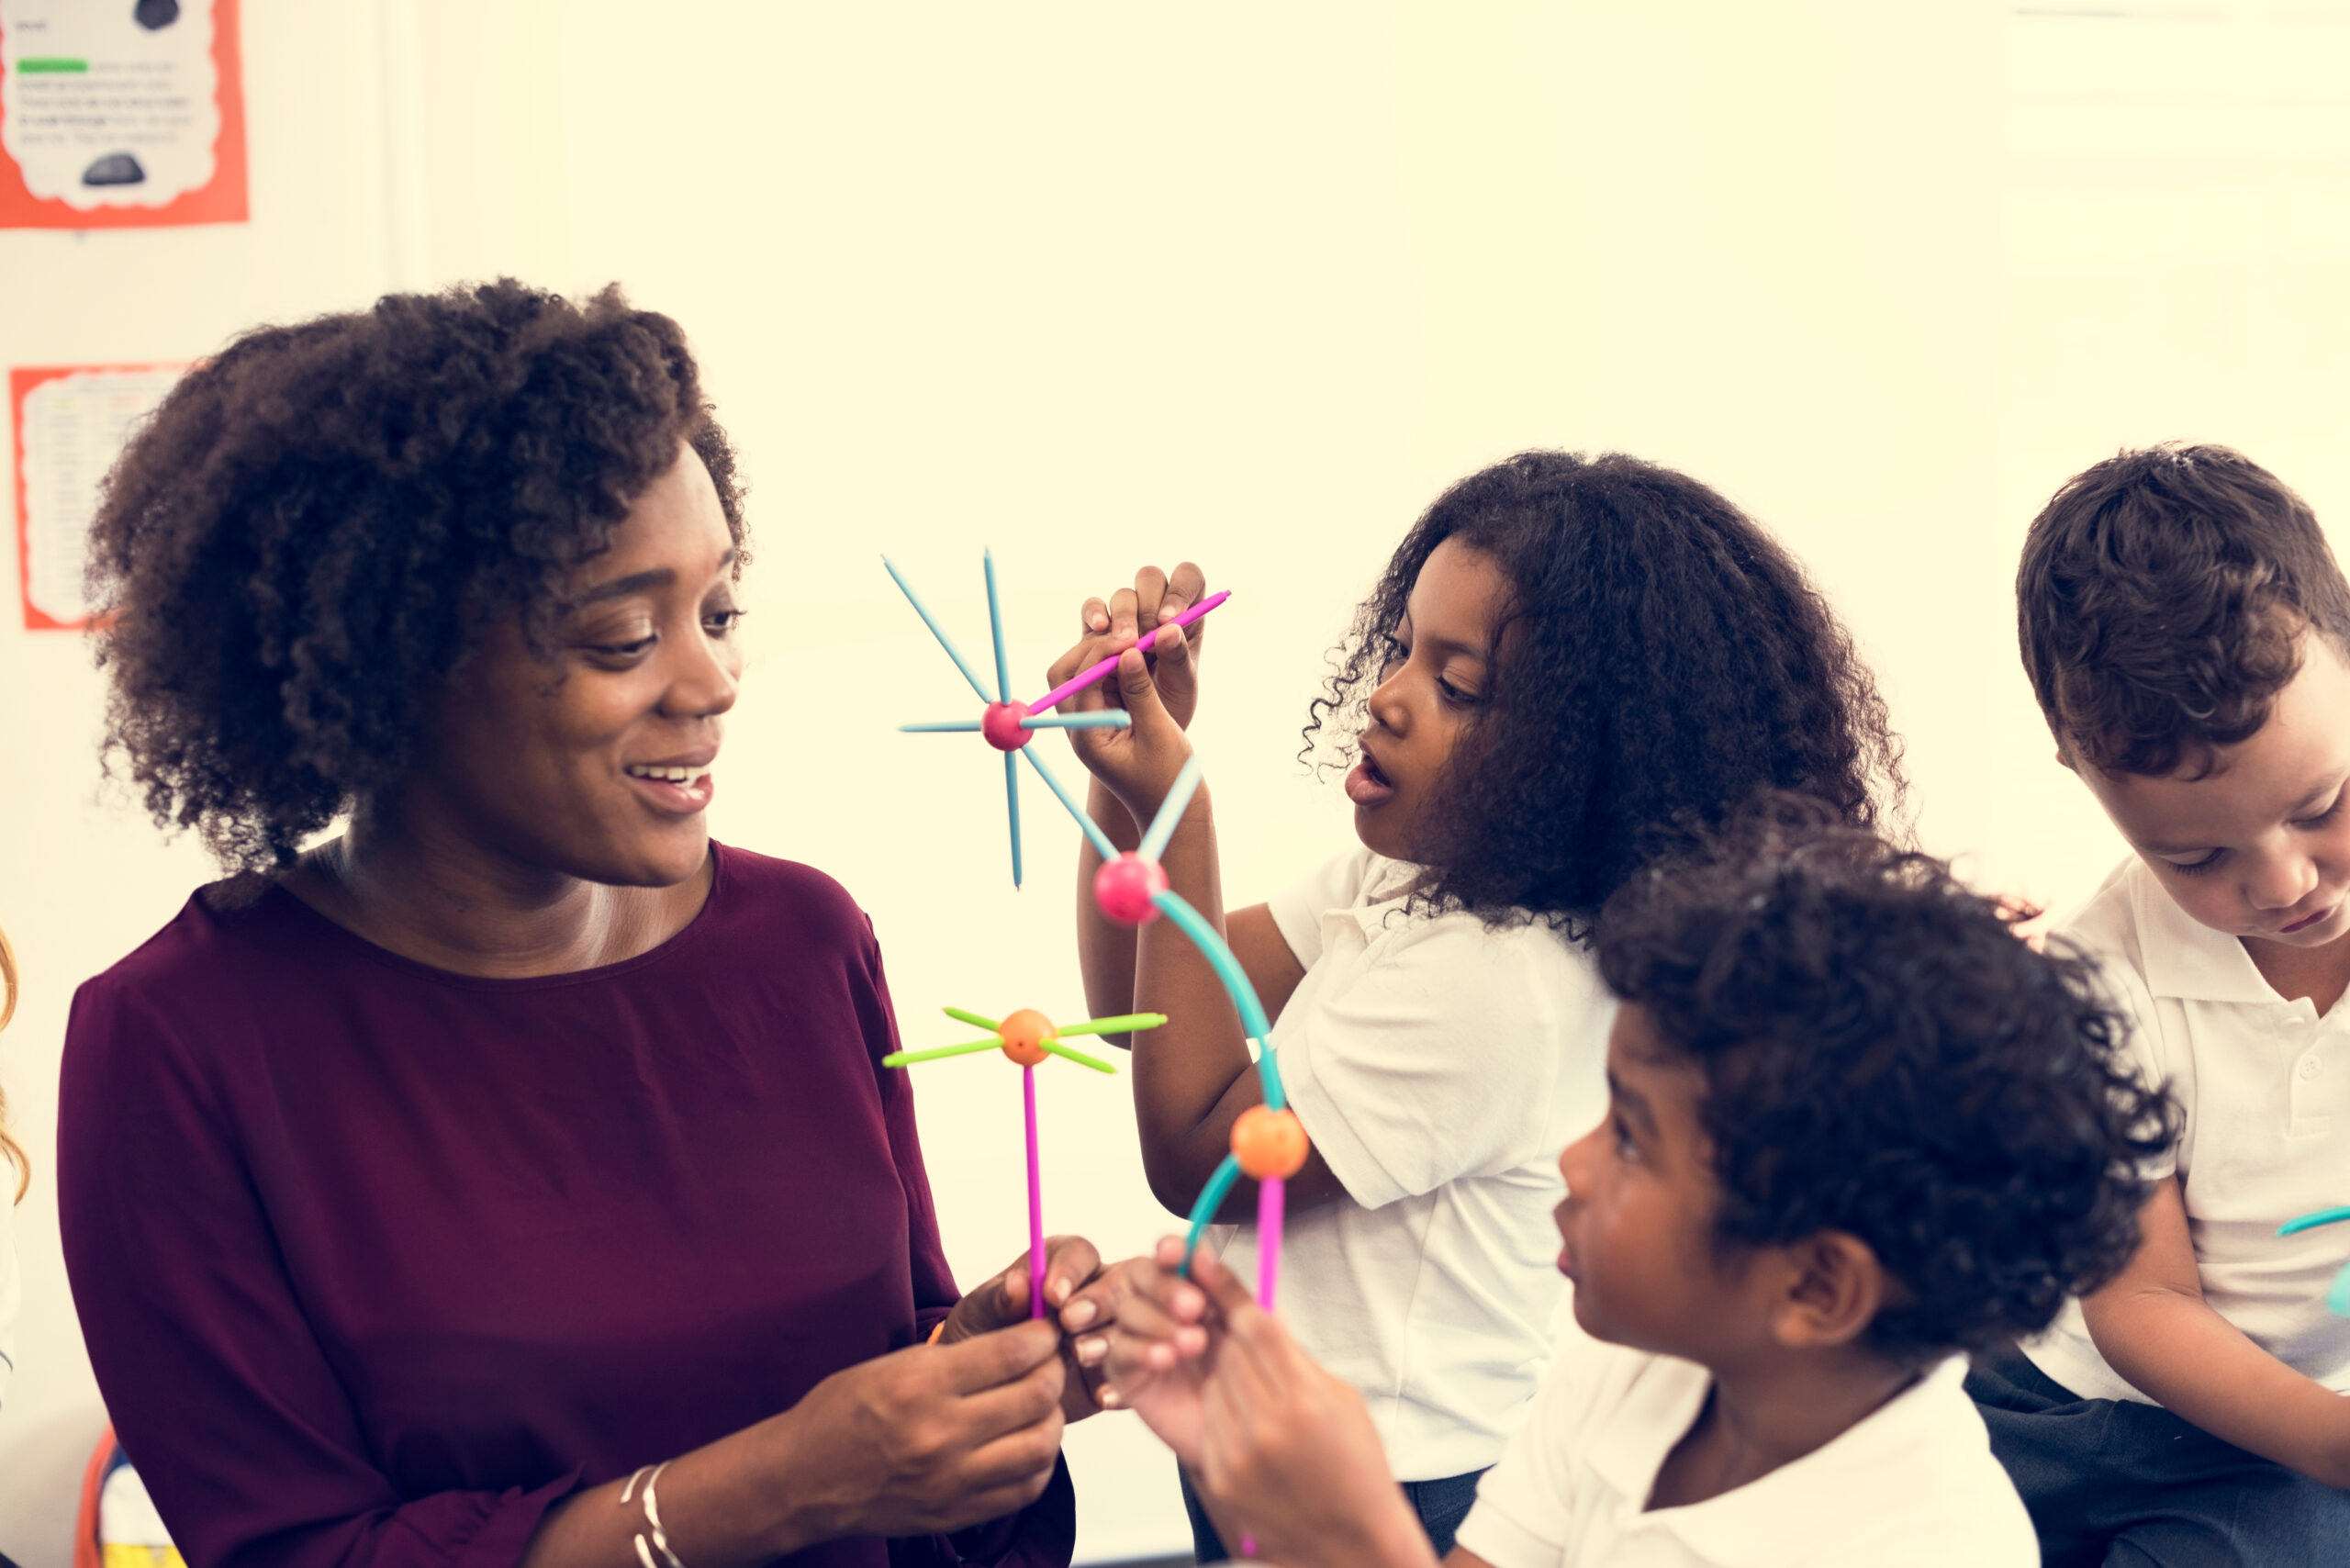 Teacher with two young students making projects with colorful sticks.